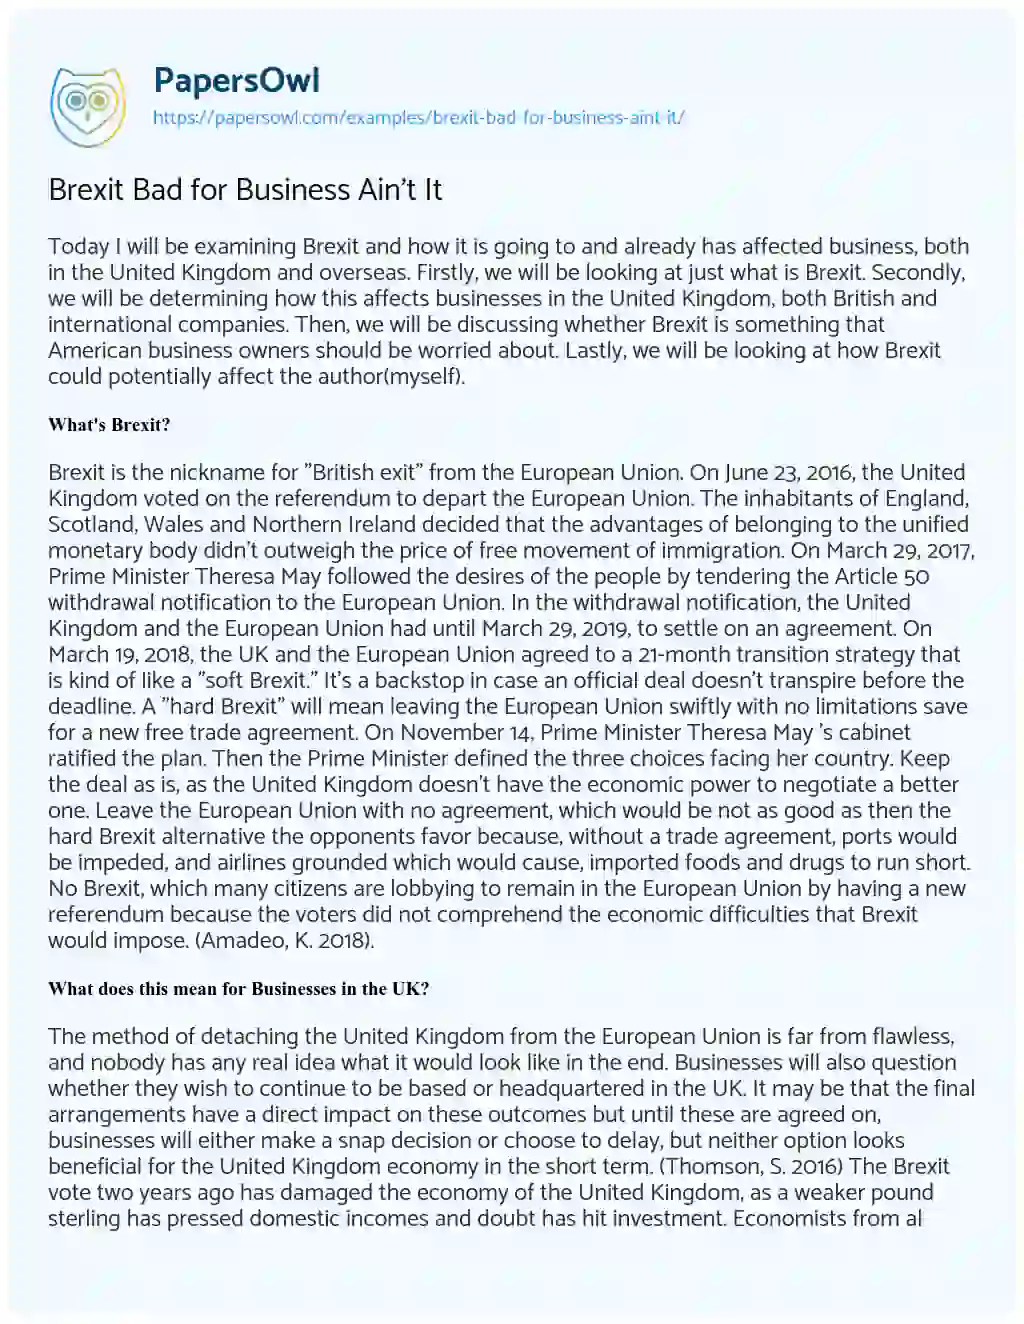 Brexit Bad for Business Ain’t it essay